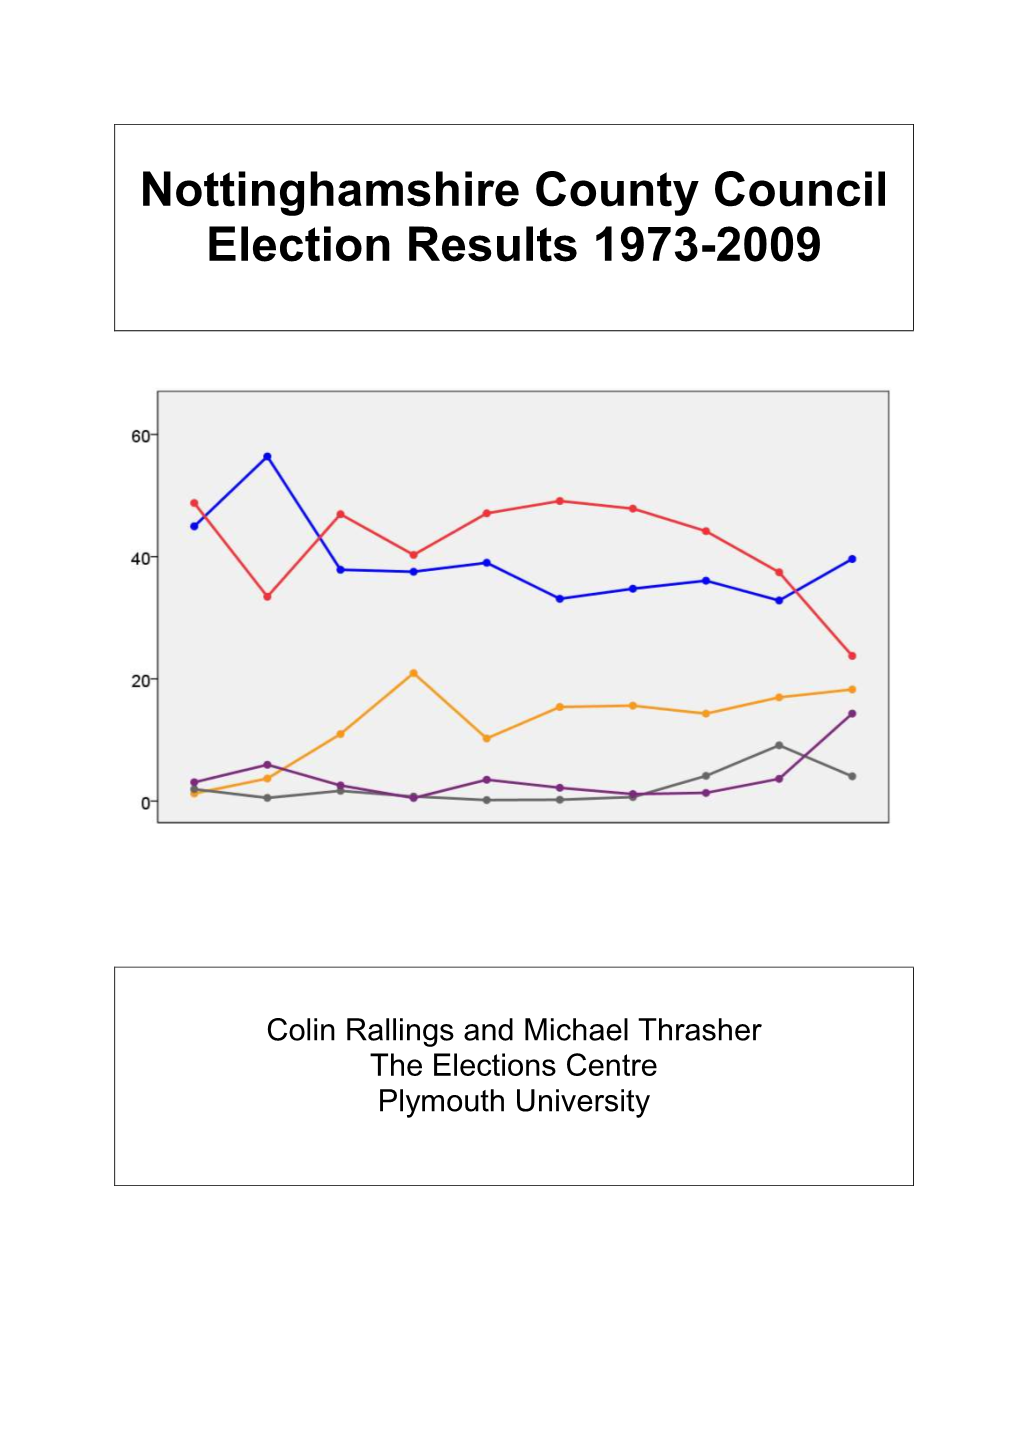 Nottinghamshire County Council Election Results 1973-2009